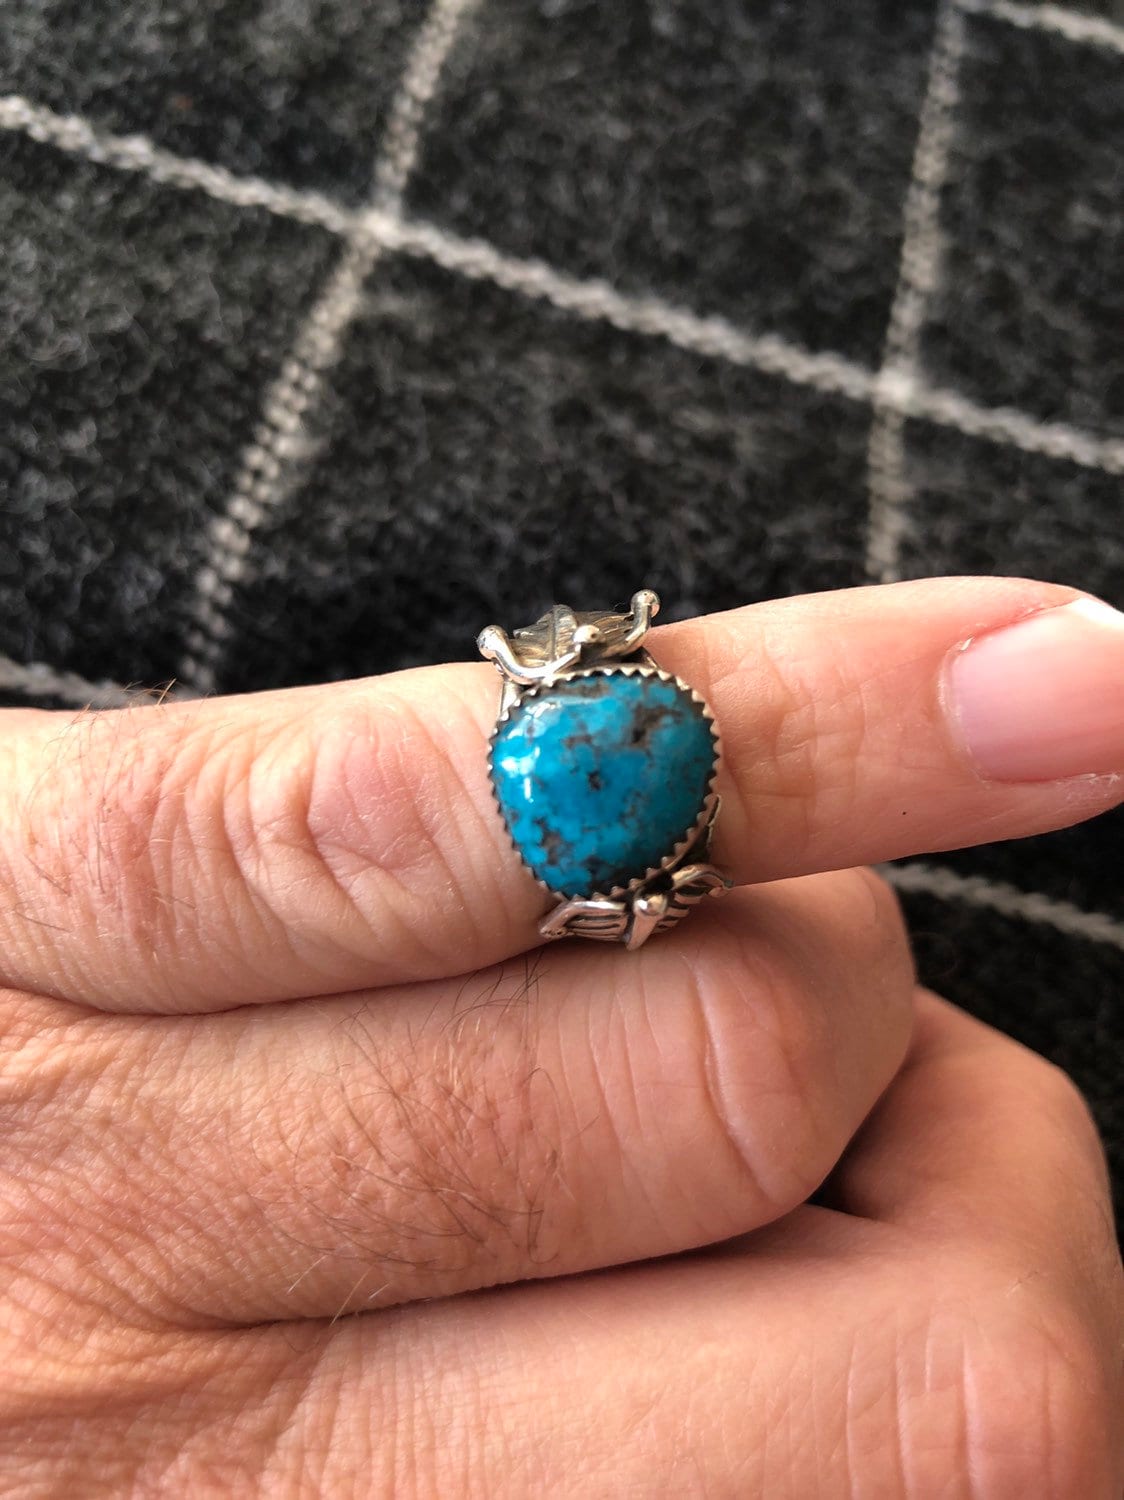 Size 8 Sterling Silver ring with high grade Kingman Turquoise hand crafted by Master Silversmith JRLucky.